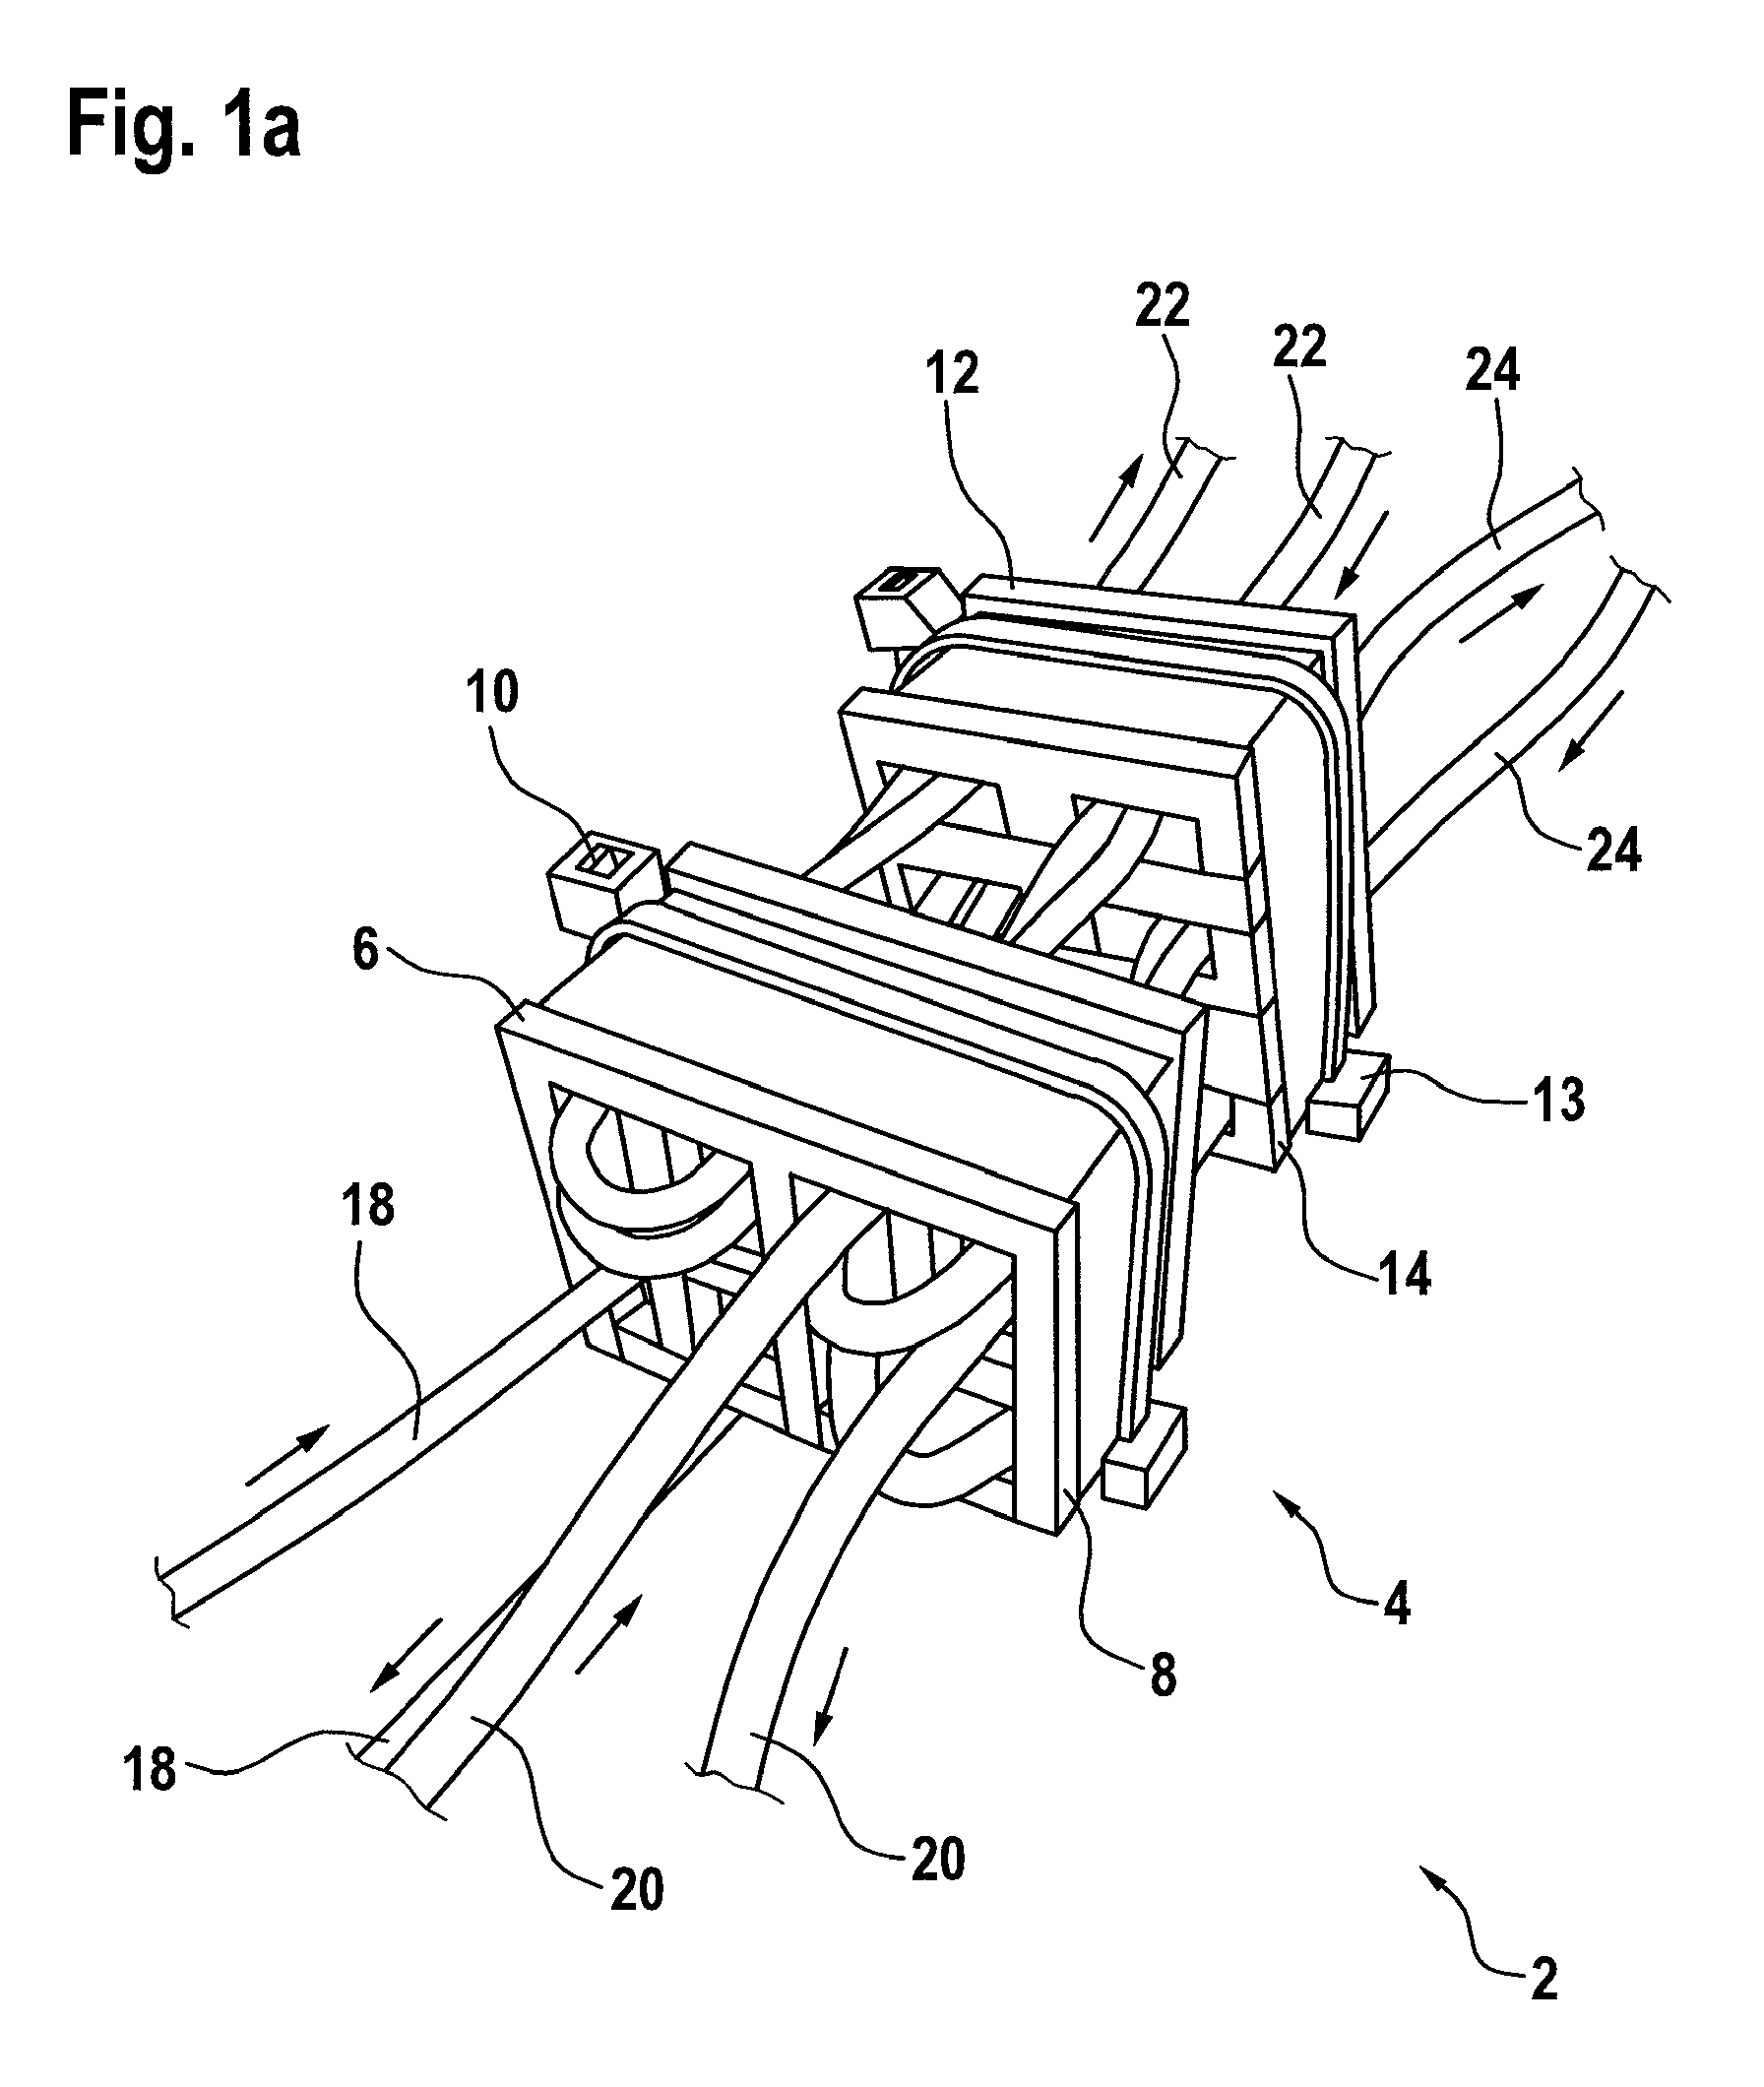 Coupling device for a multi-phase converter